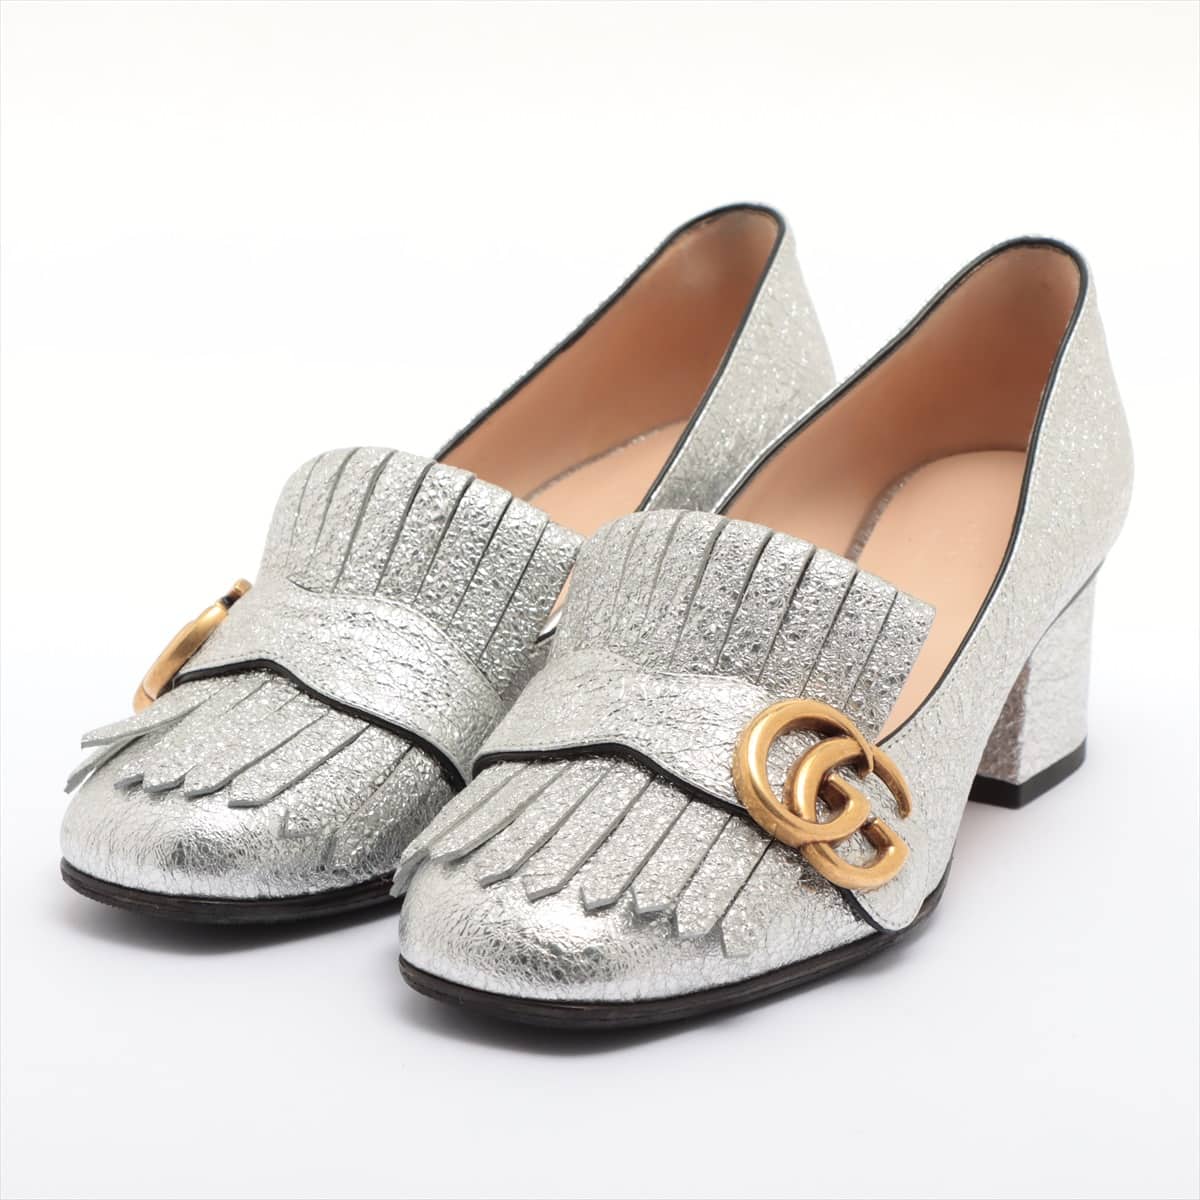 Gucci GG Marmont Leather Pumps 35 Ladies' Silver Fringe Sole repair